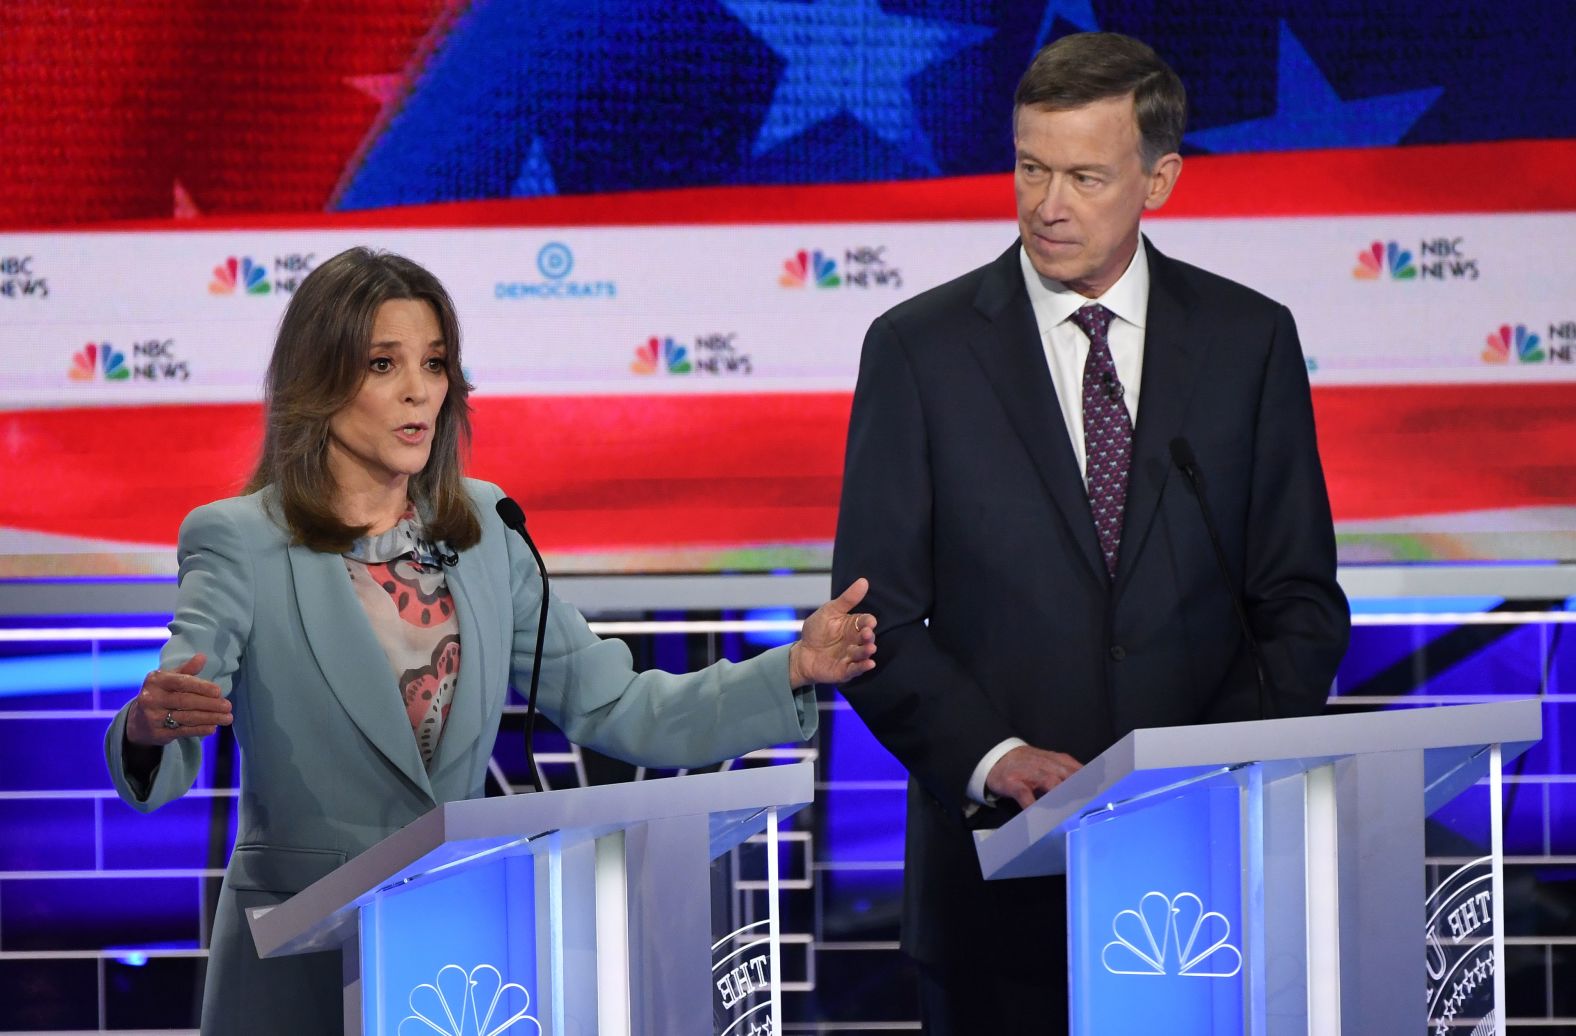 Williamson makes a point during the first Democratic debates in June 2019.